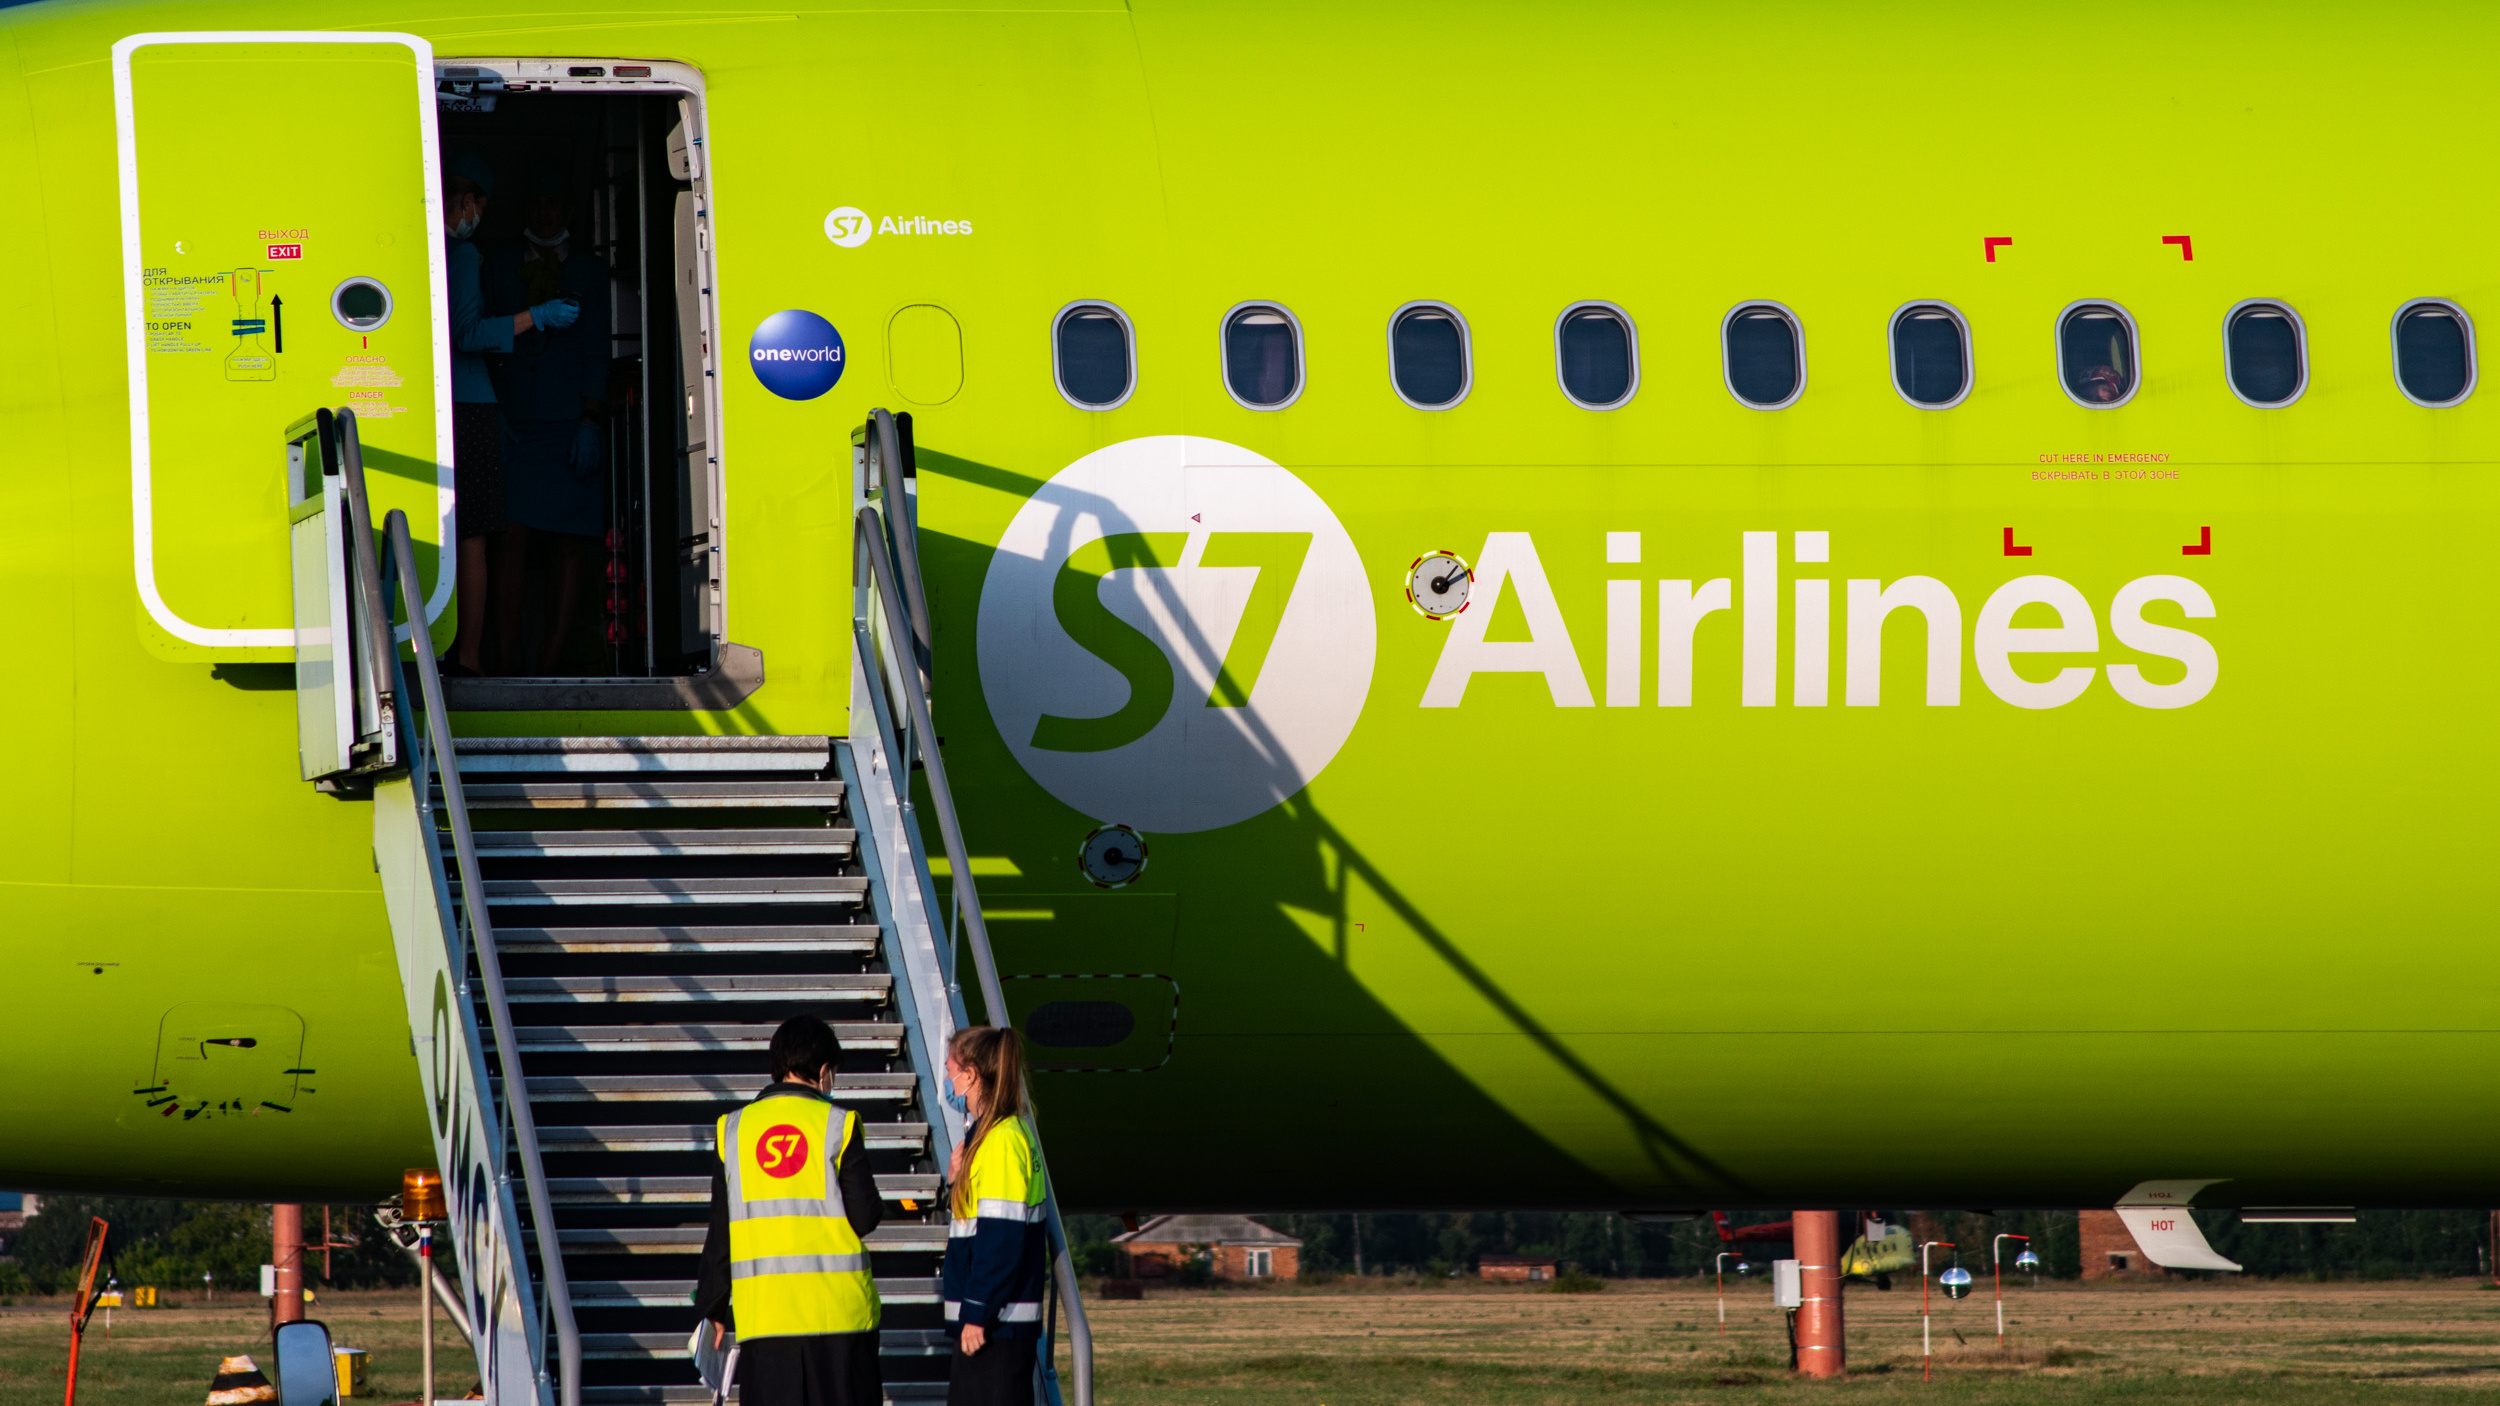 S7 Airlines          -   